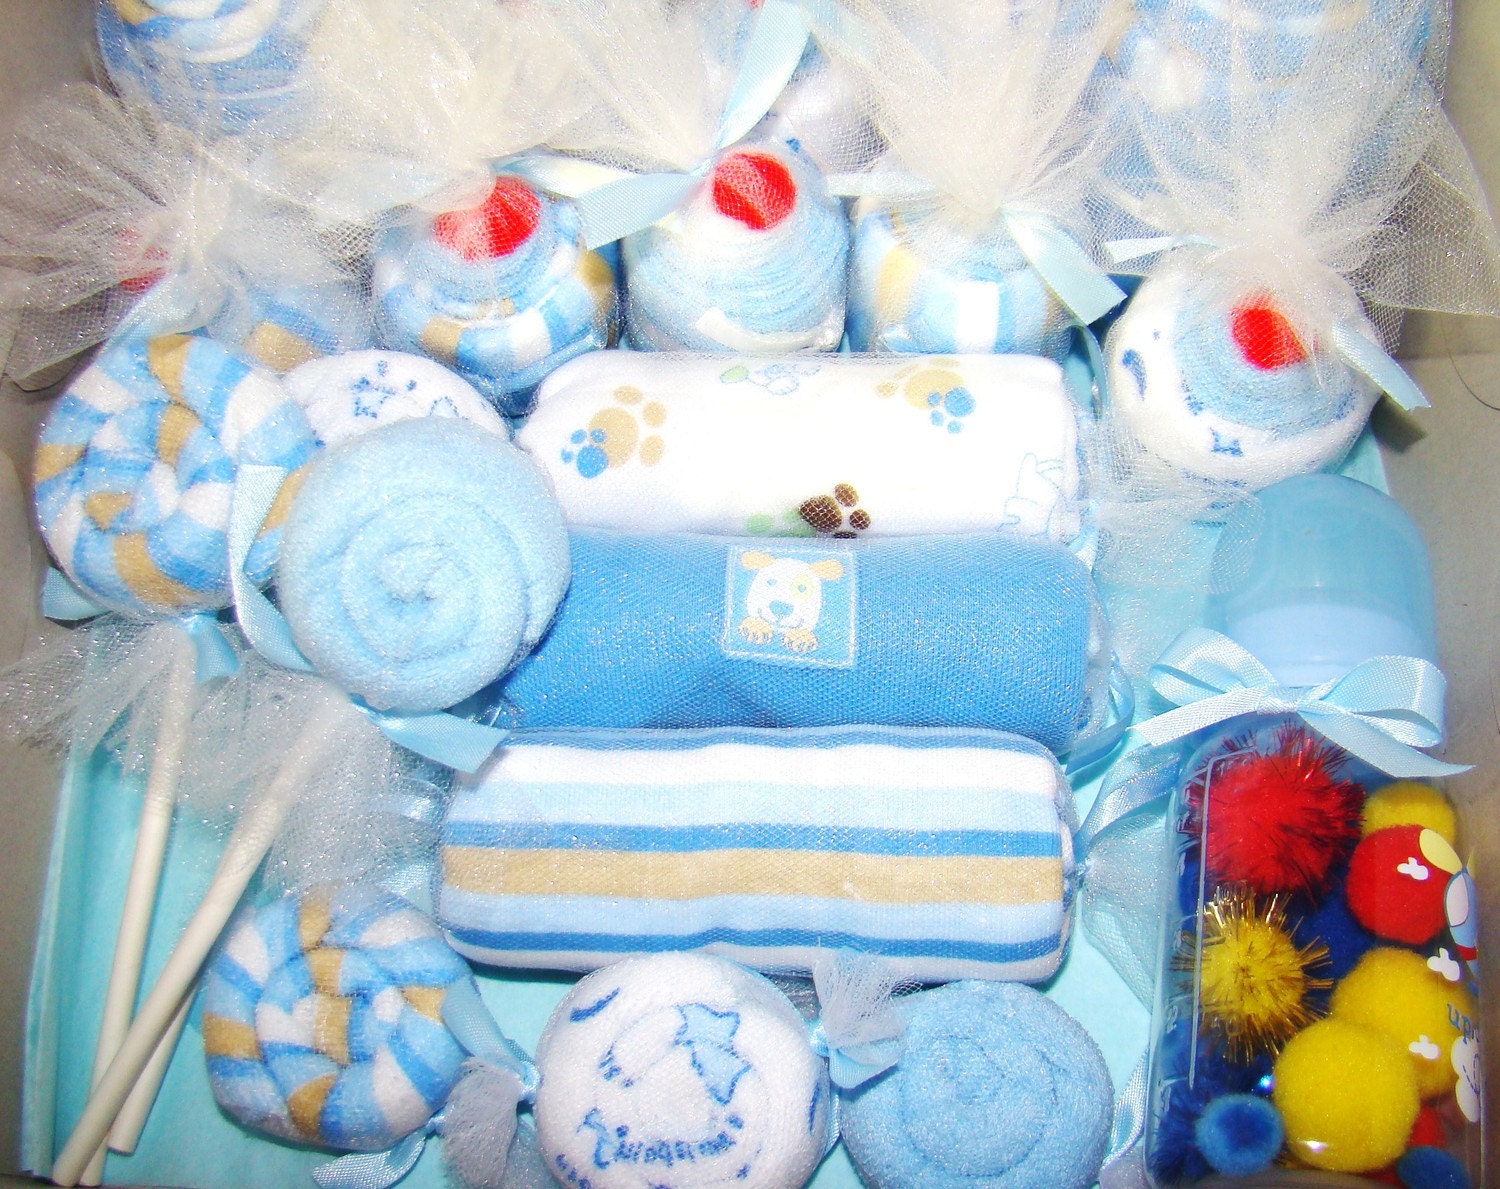 FRESH OUT OF THE OVEN Baby Shower
Gift Set